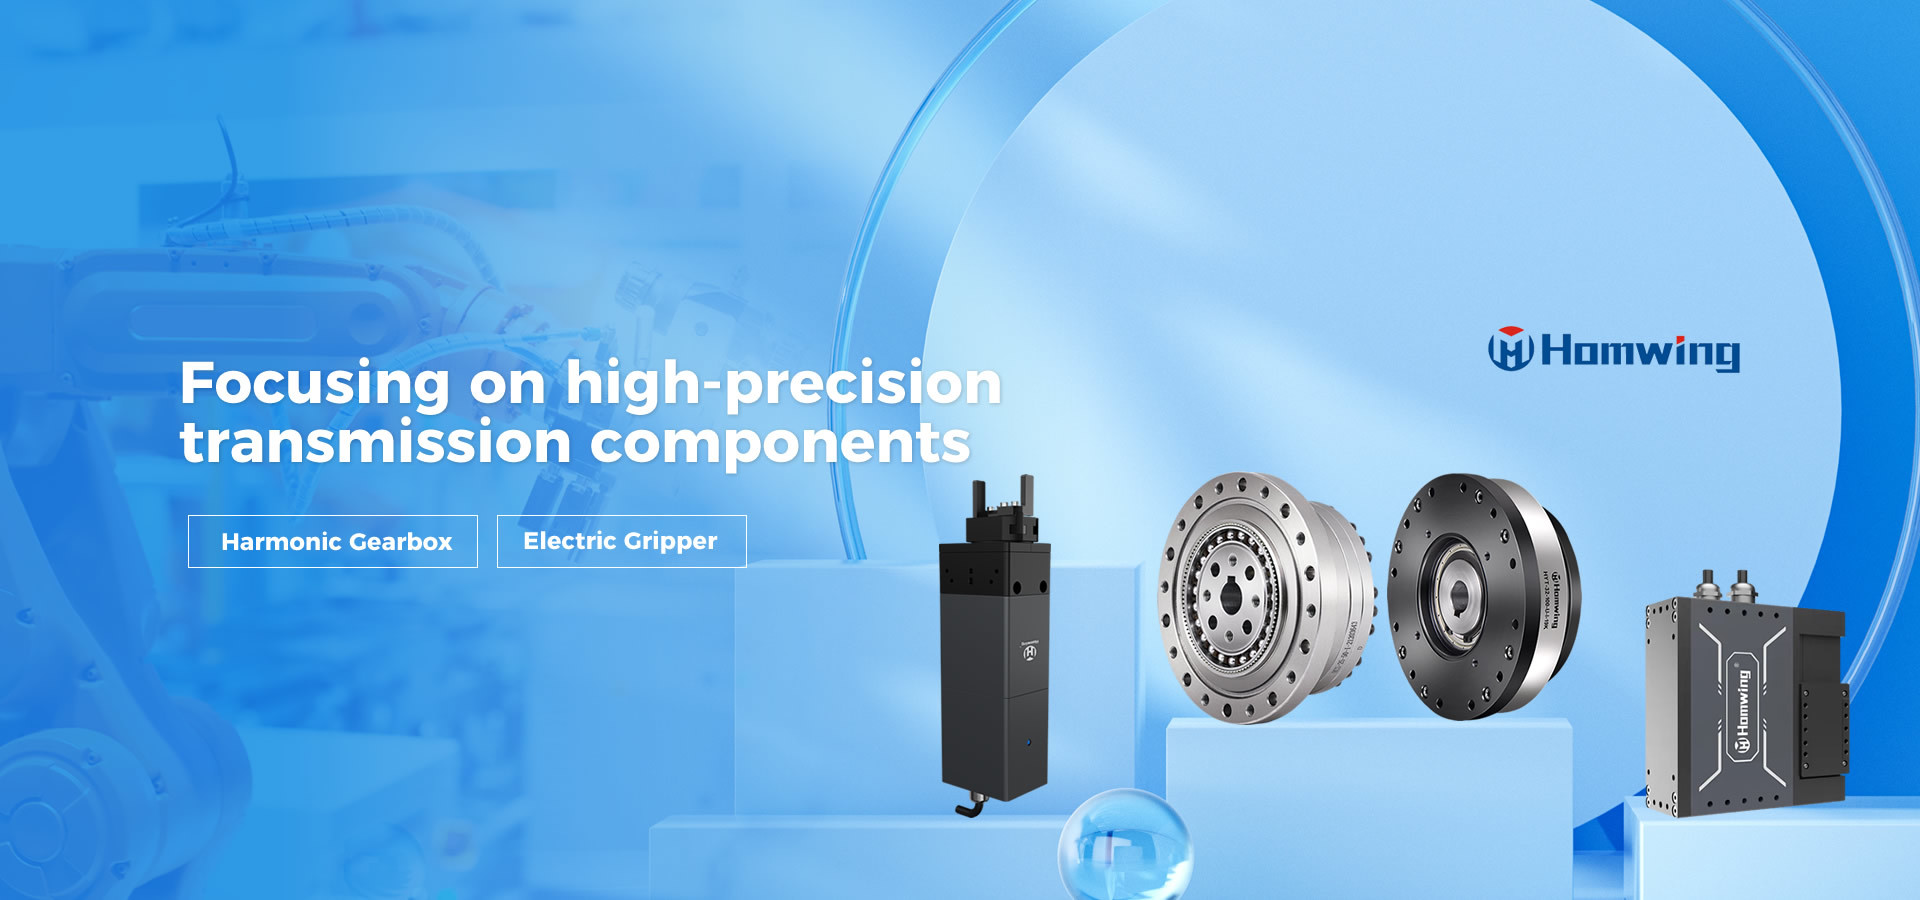 Focusing on high-precision transmission components